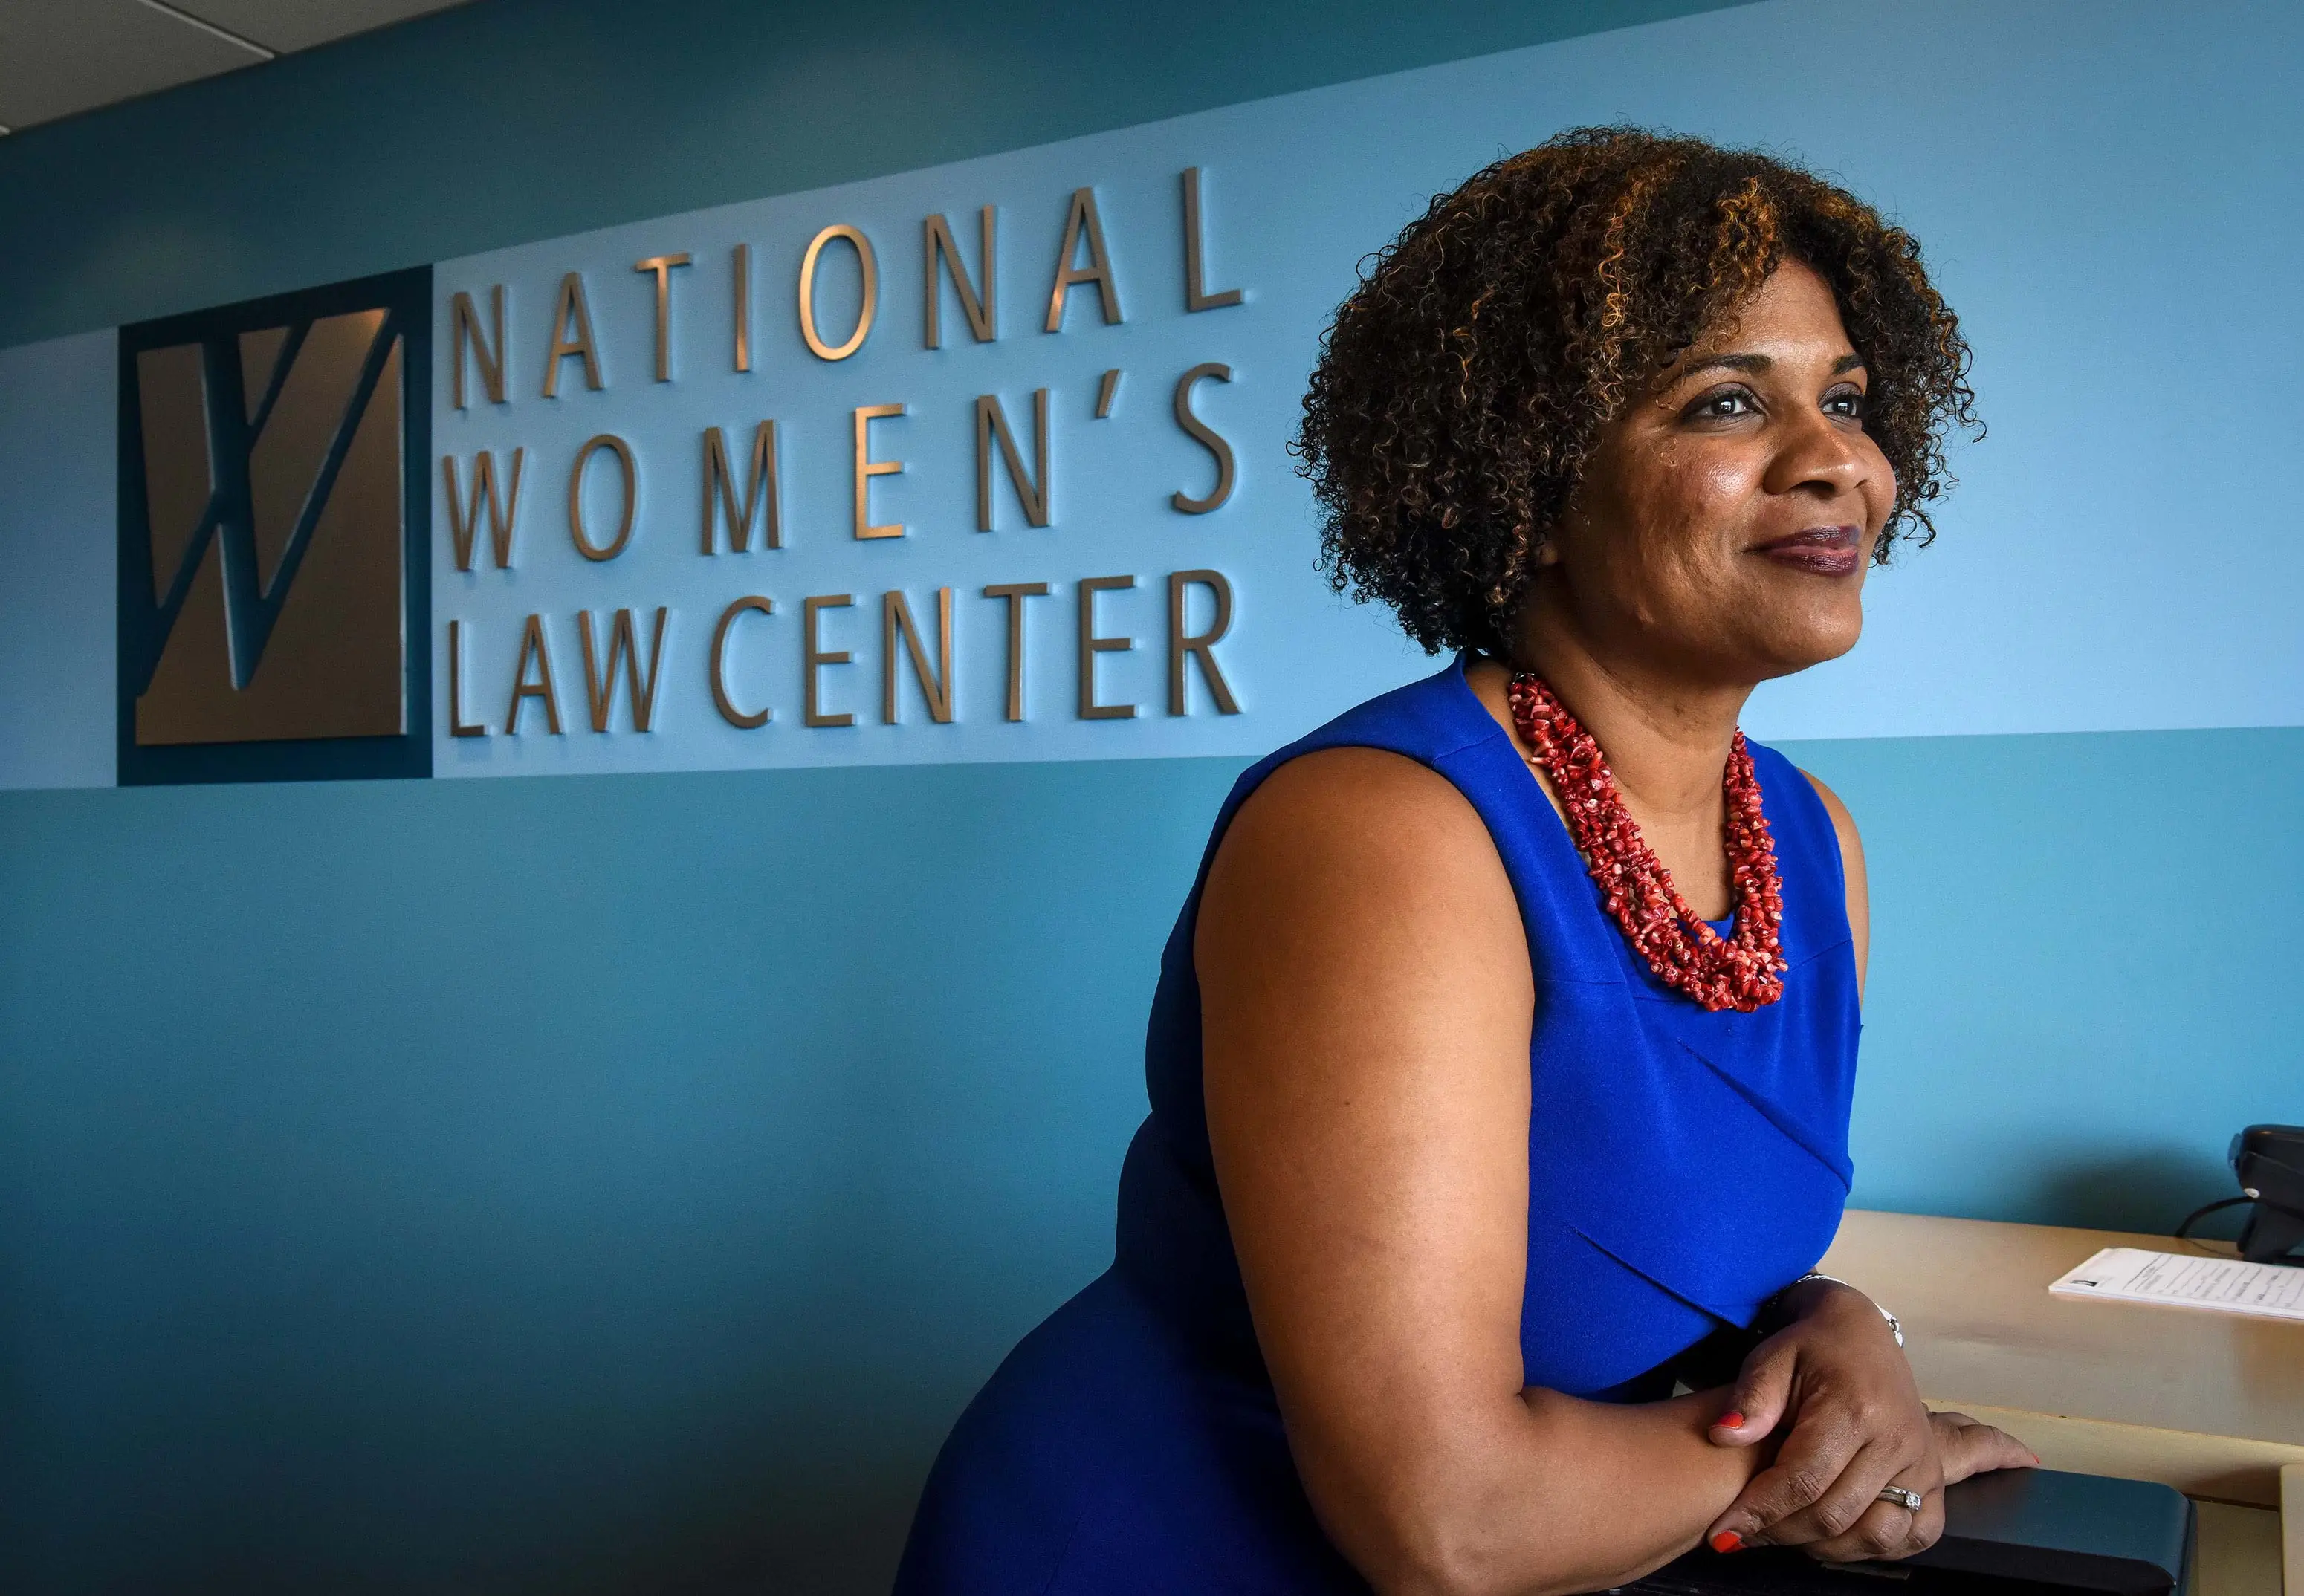 Fatima Goss Graves, a Black woman wearing a bright blue dress and coral necklace, stands in front of a large wall sign for the National Women's Law Center.